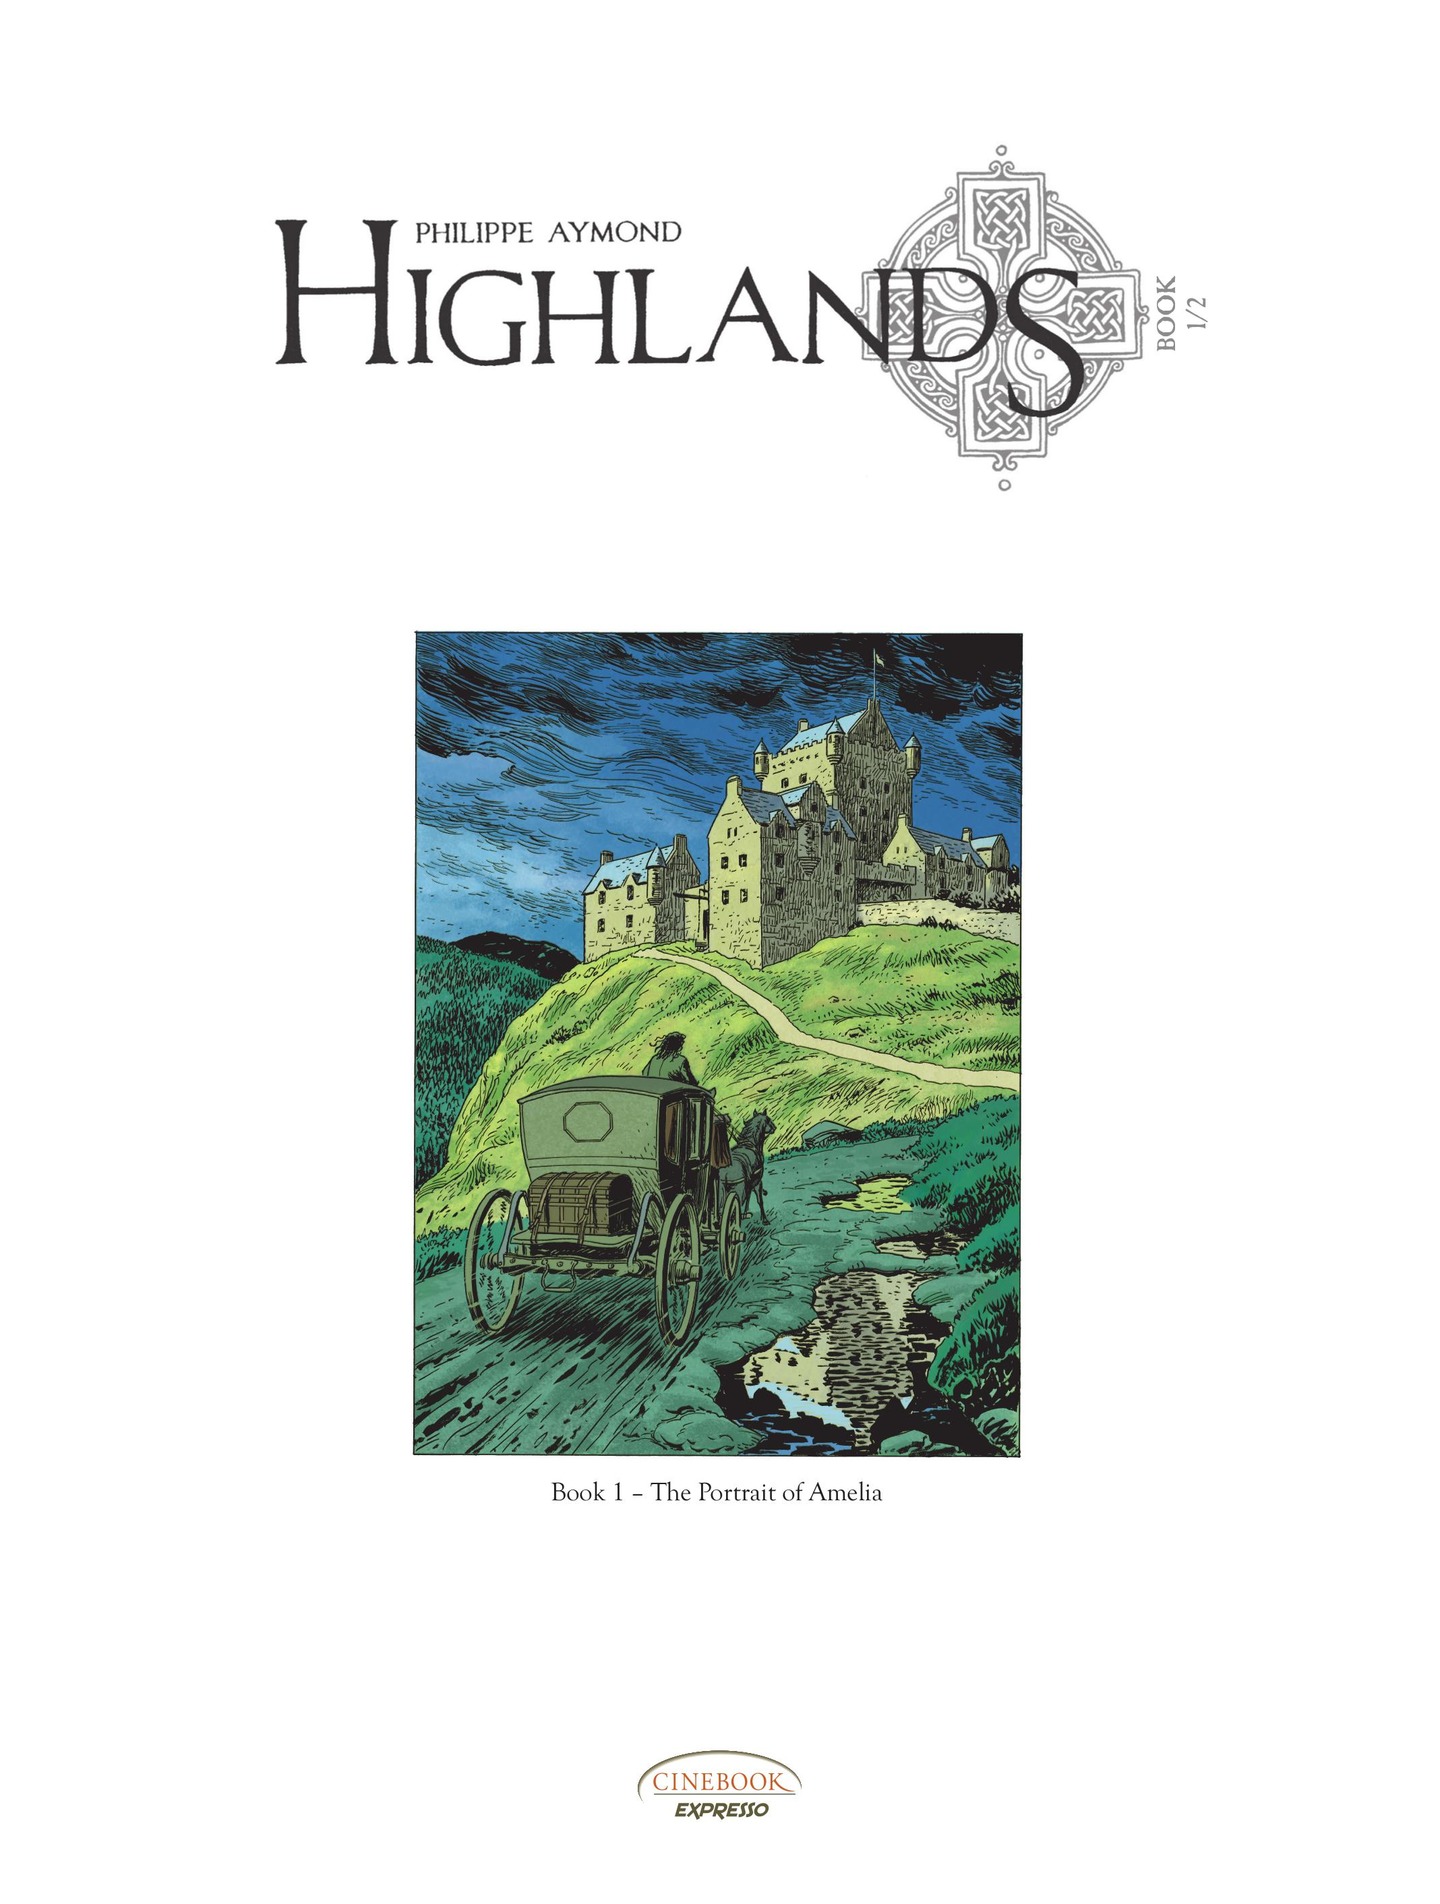 Read online Highlands comic -  Issue #1 - 2